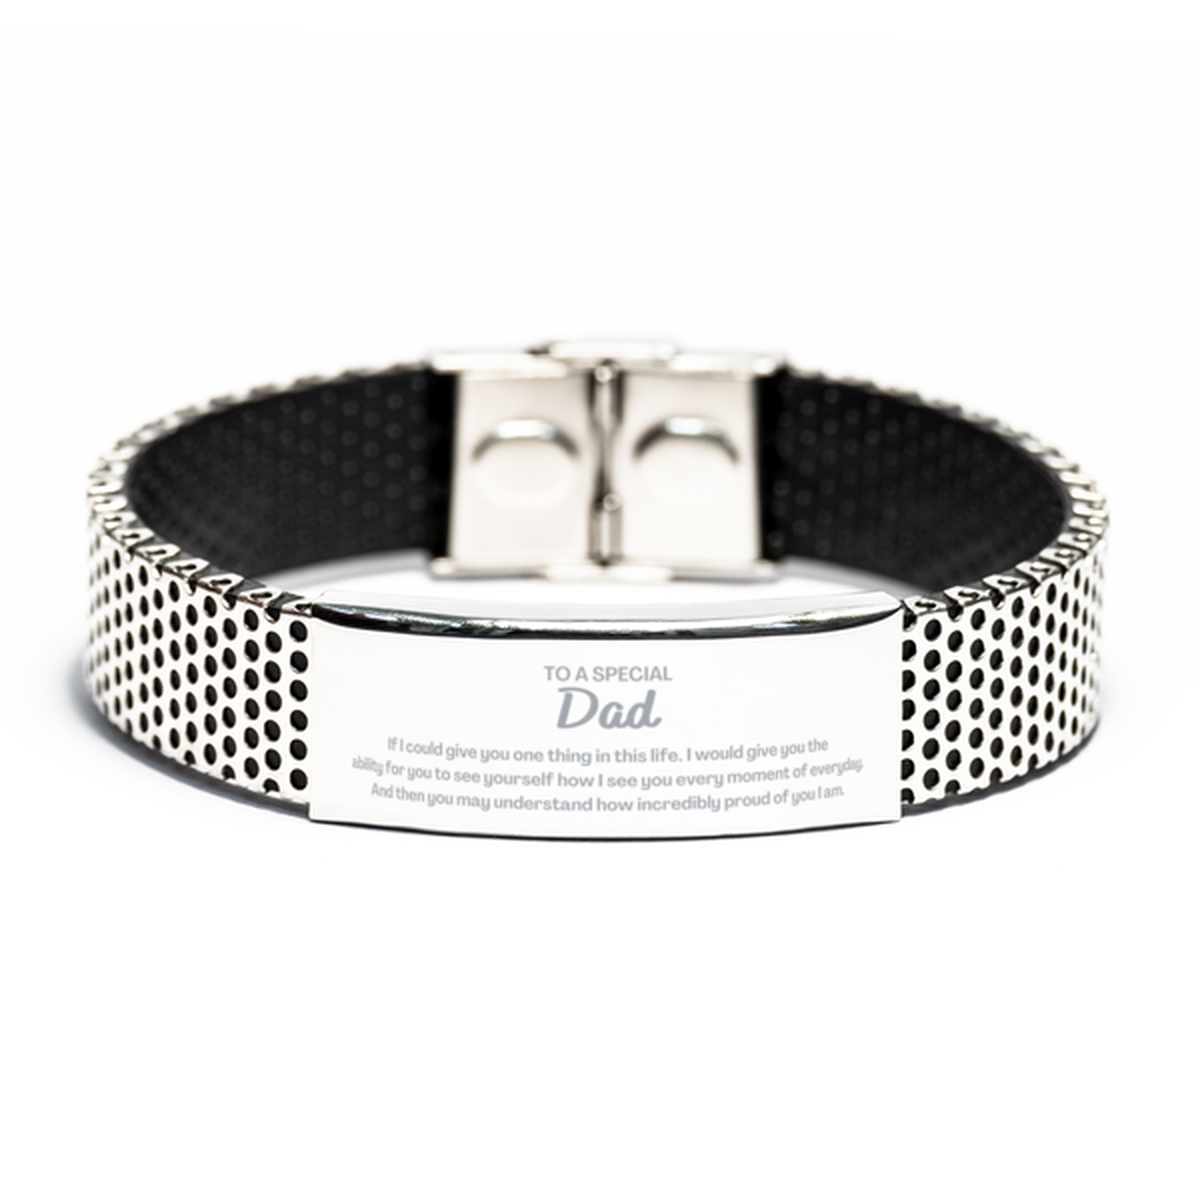 To My Dad Stainless Steel Bracelet, Gifts For Dad Engraved, Inspirational Gifts for Christmas Birthday, Epic Gifts for Dad To A Special Dad how incredibly proud of you I am